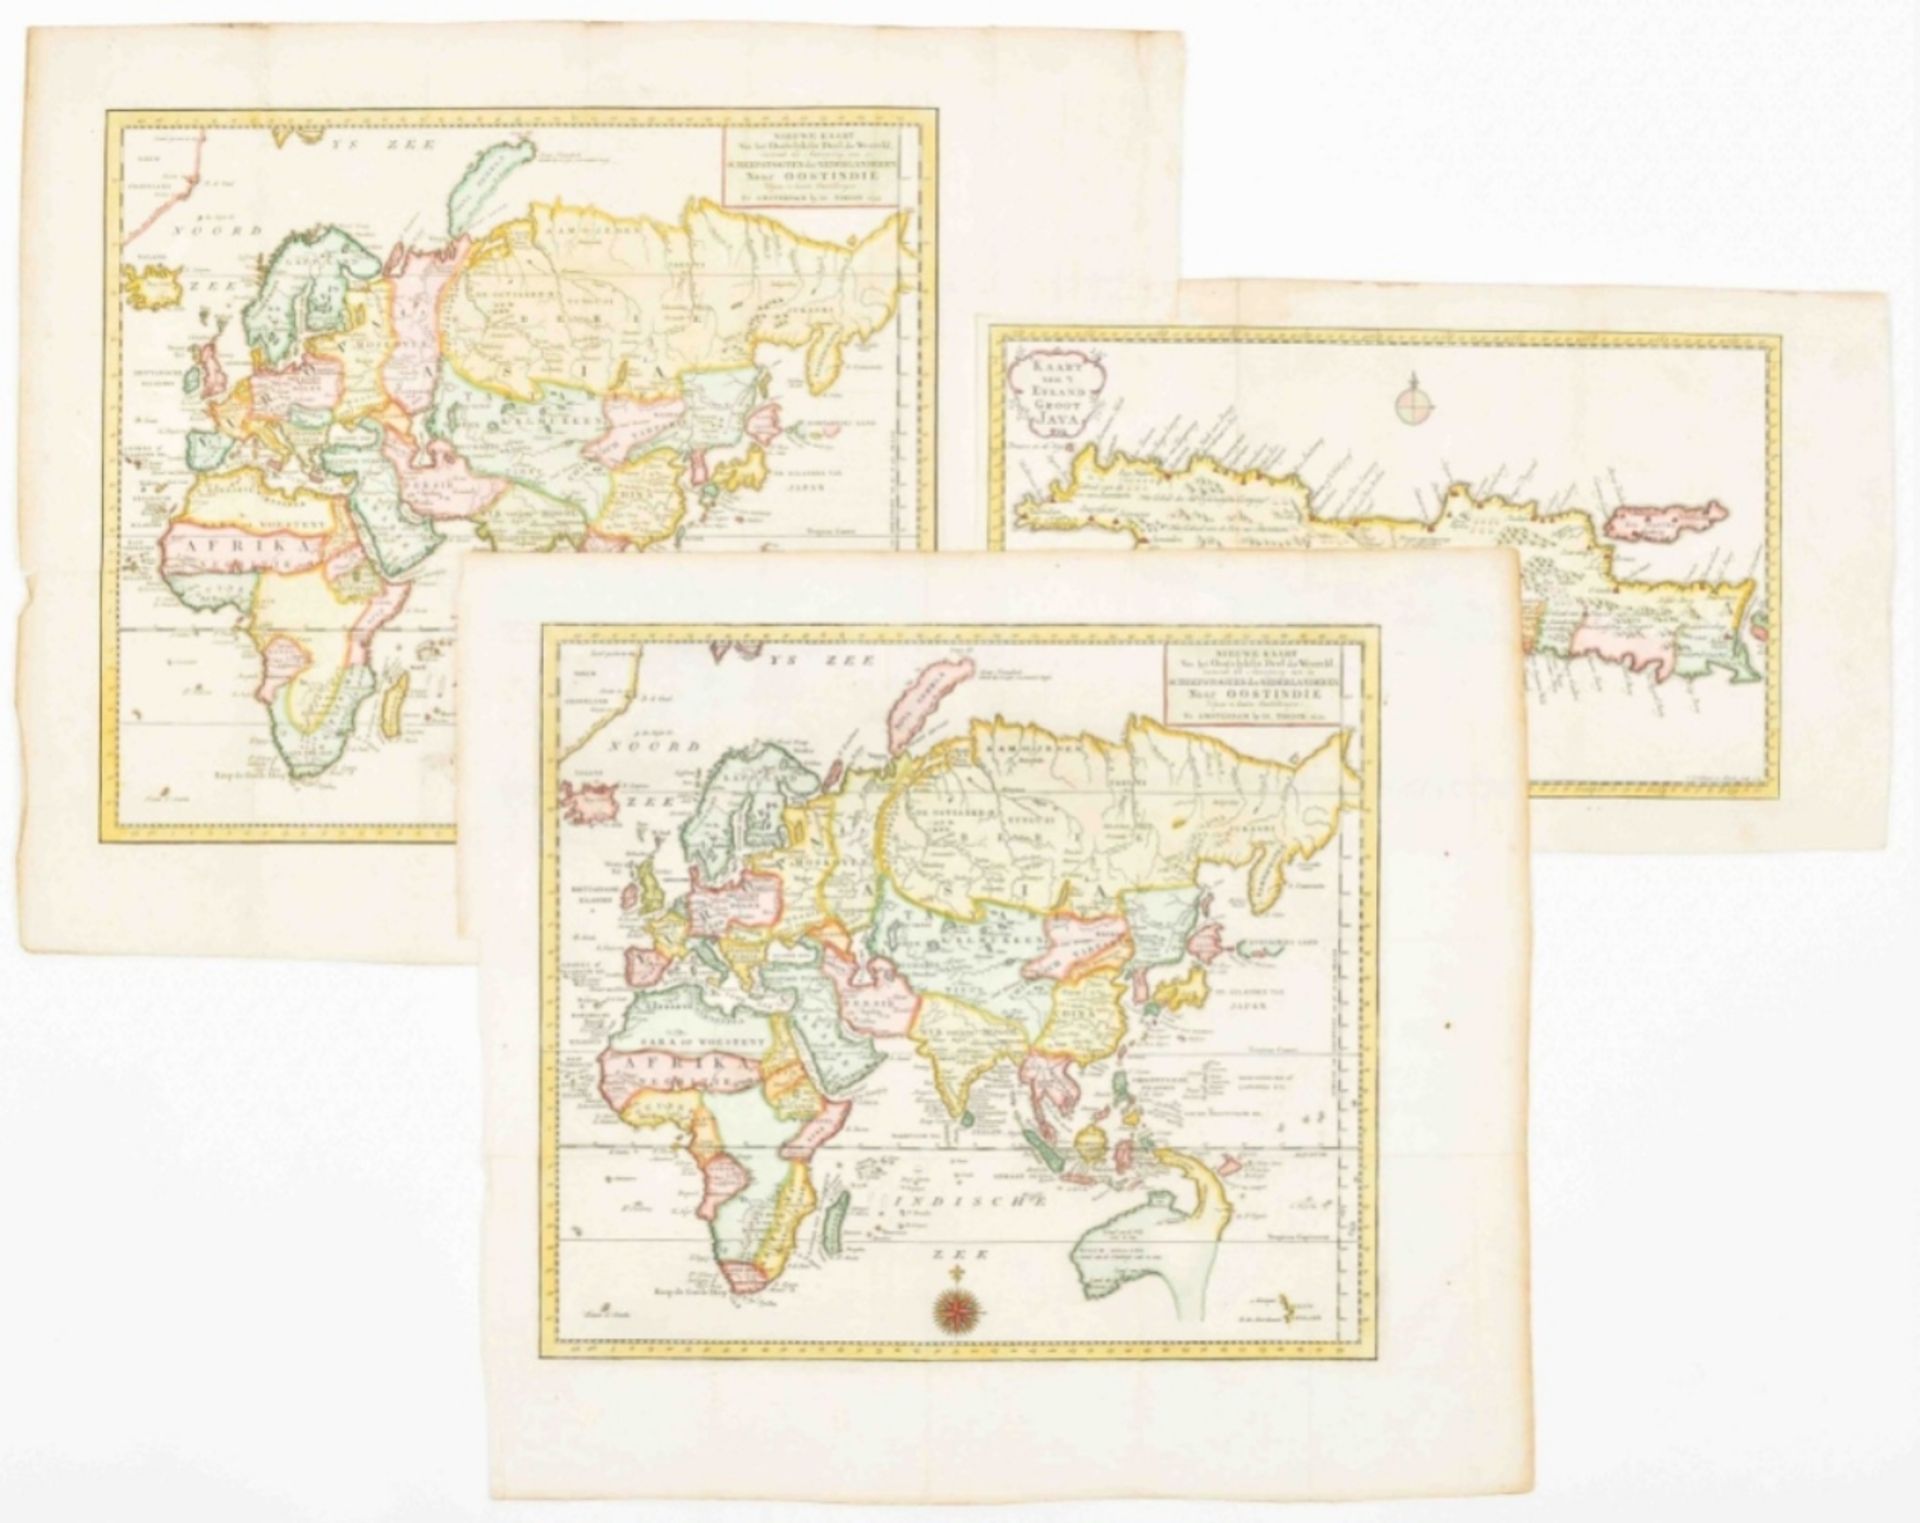 Three maps publ. by Isaak Tirion: Nieuwe Kaart